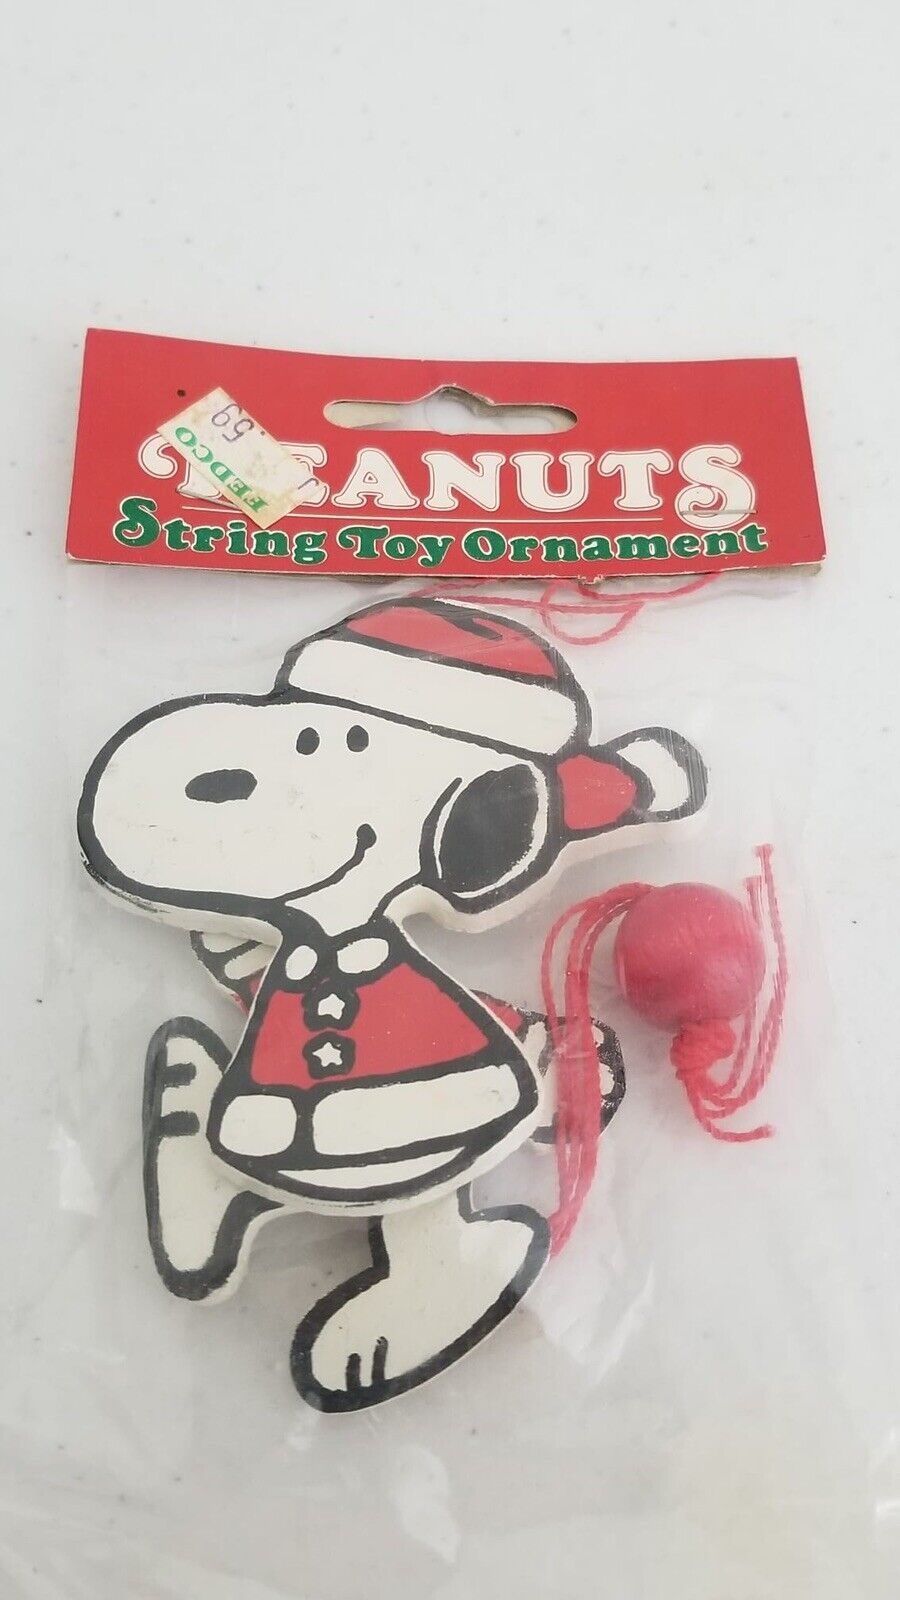 Vintage Peanuts Snoopy Christmas Ornament Set with Midwest Importers Wooden Sleds - Classic Holiday Decor Collection - TreasuTiques